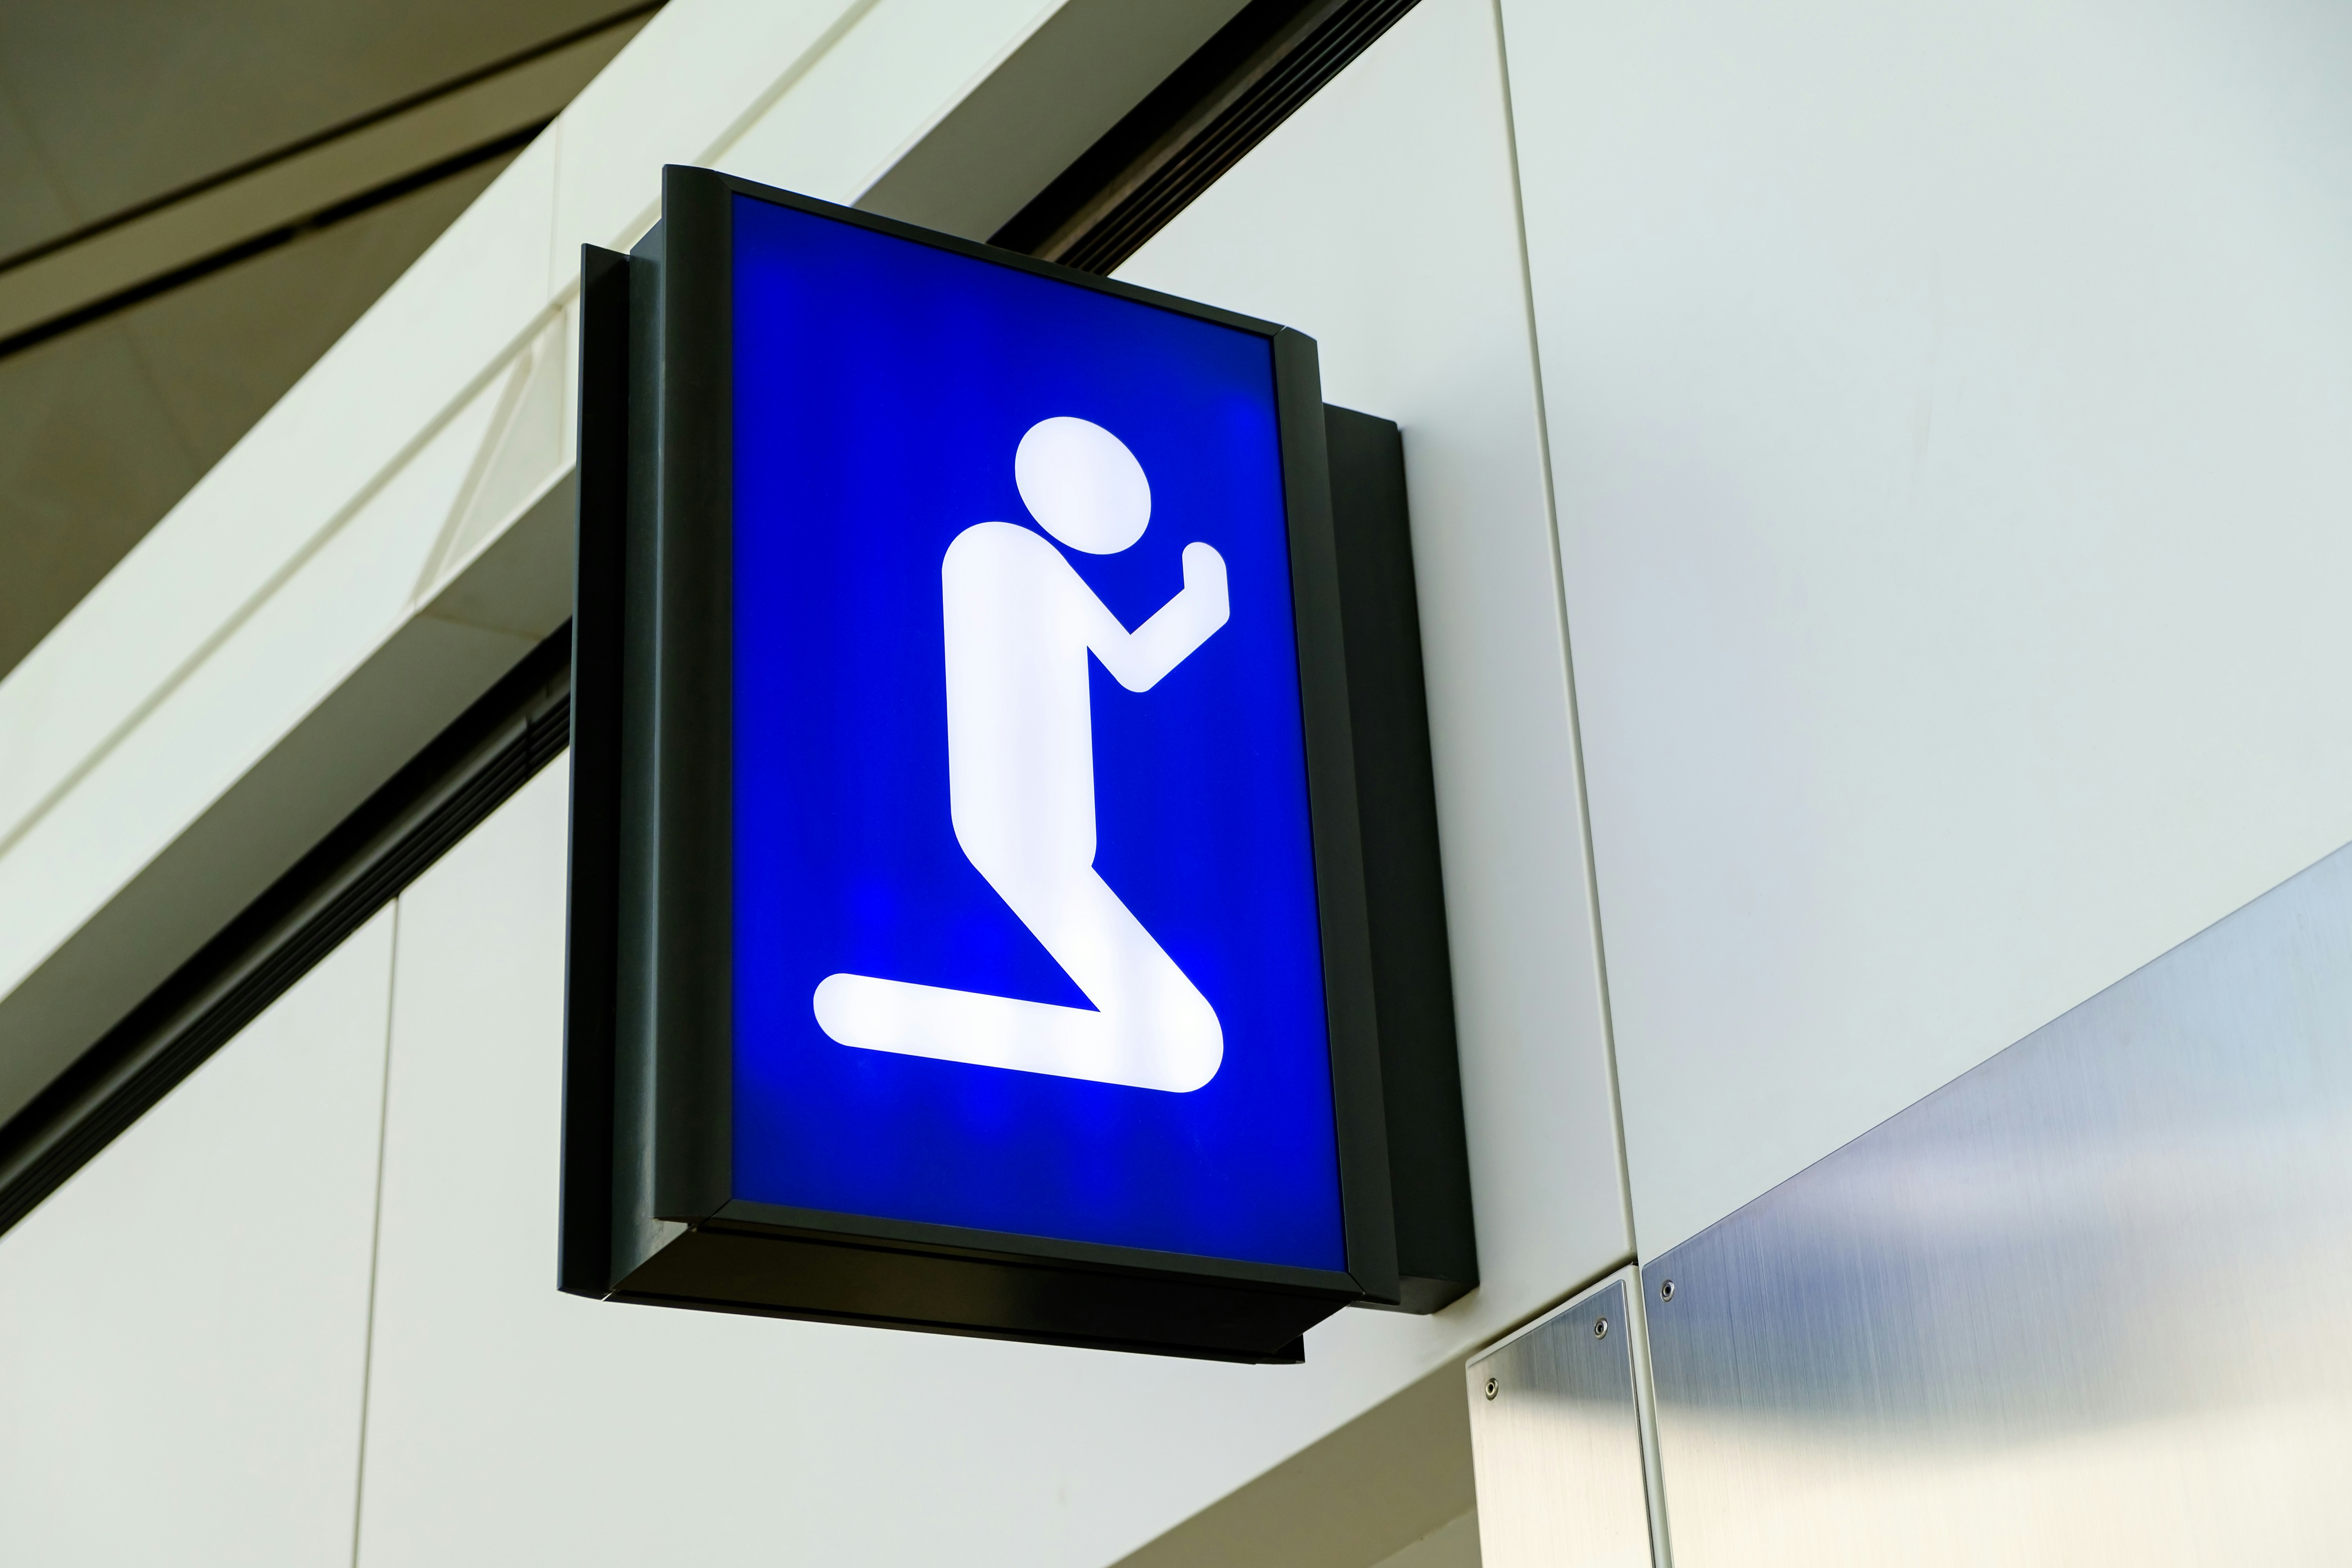 A blue sign with white figure kneeling with its arms raised is on display at an airport